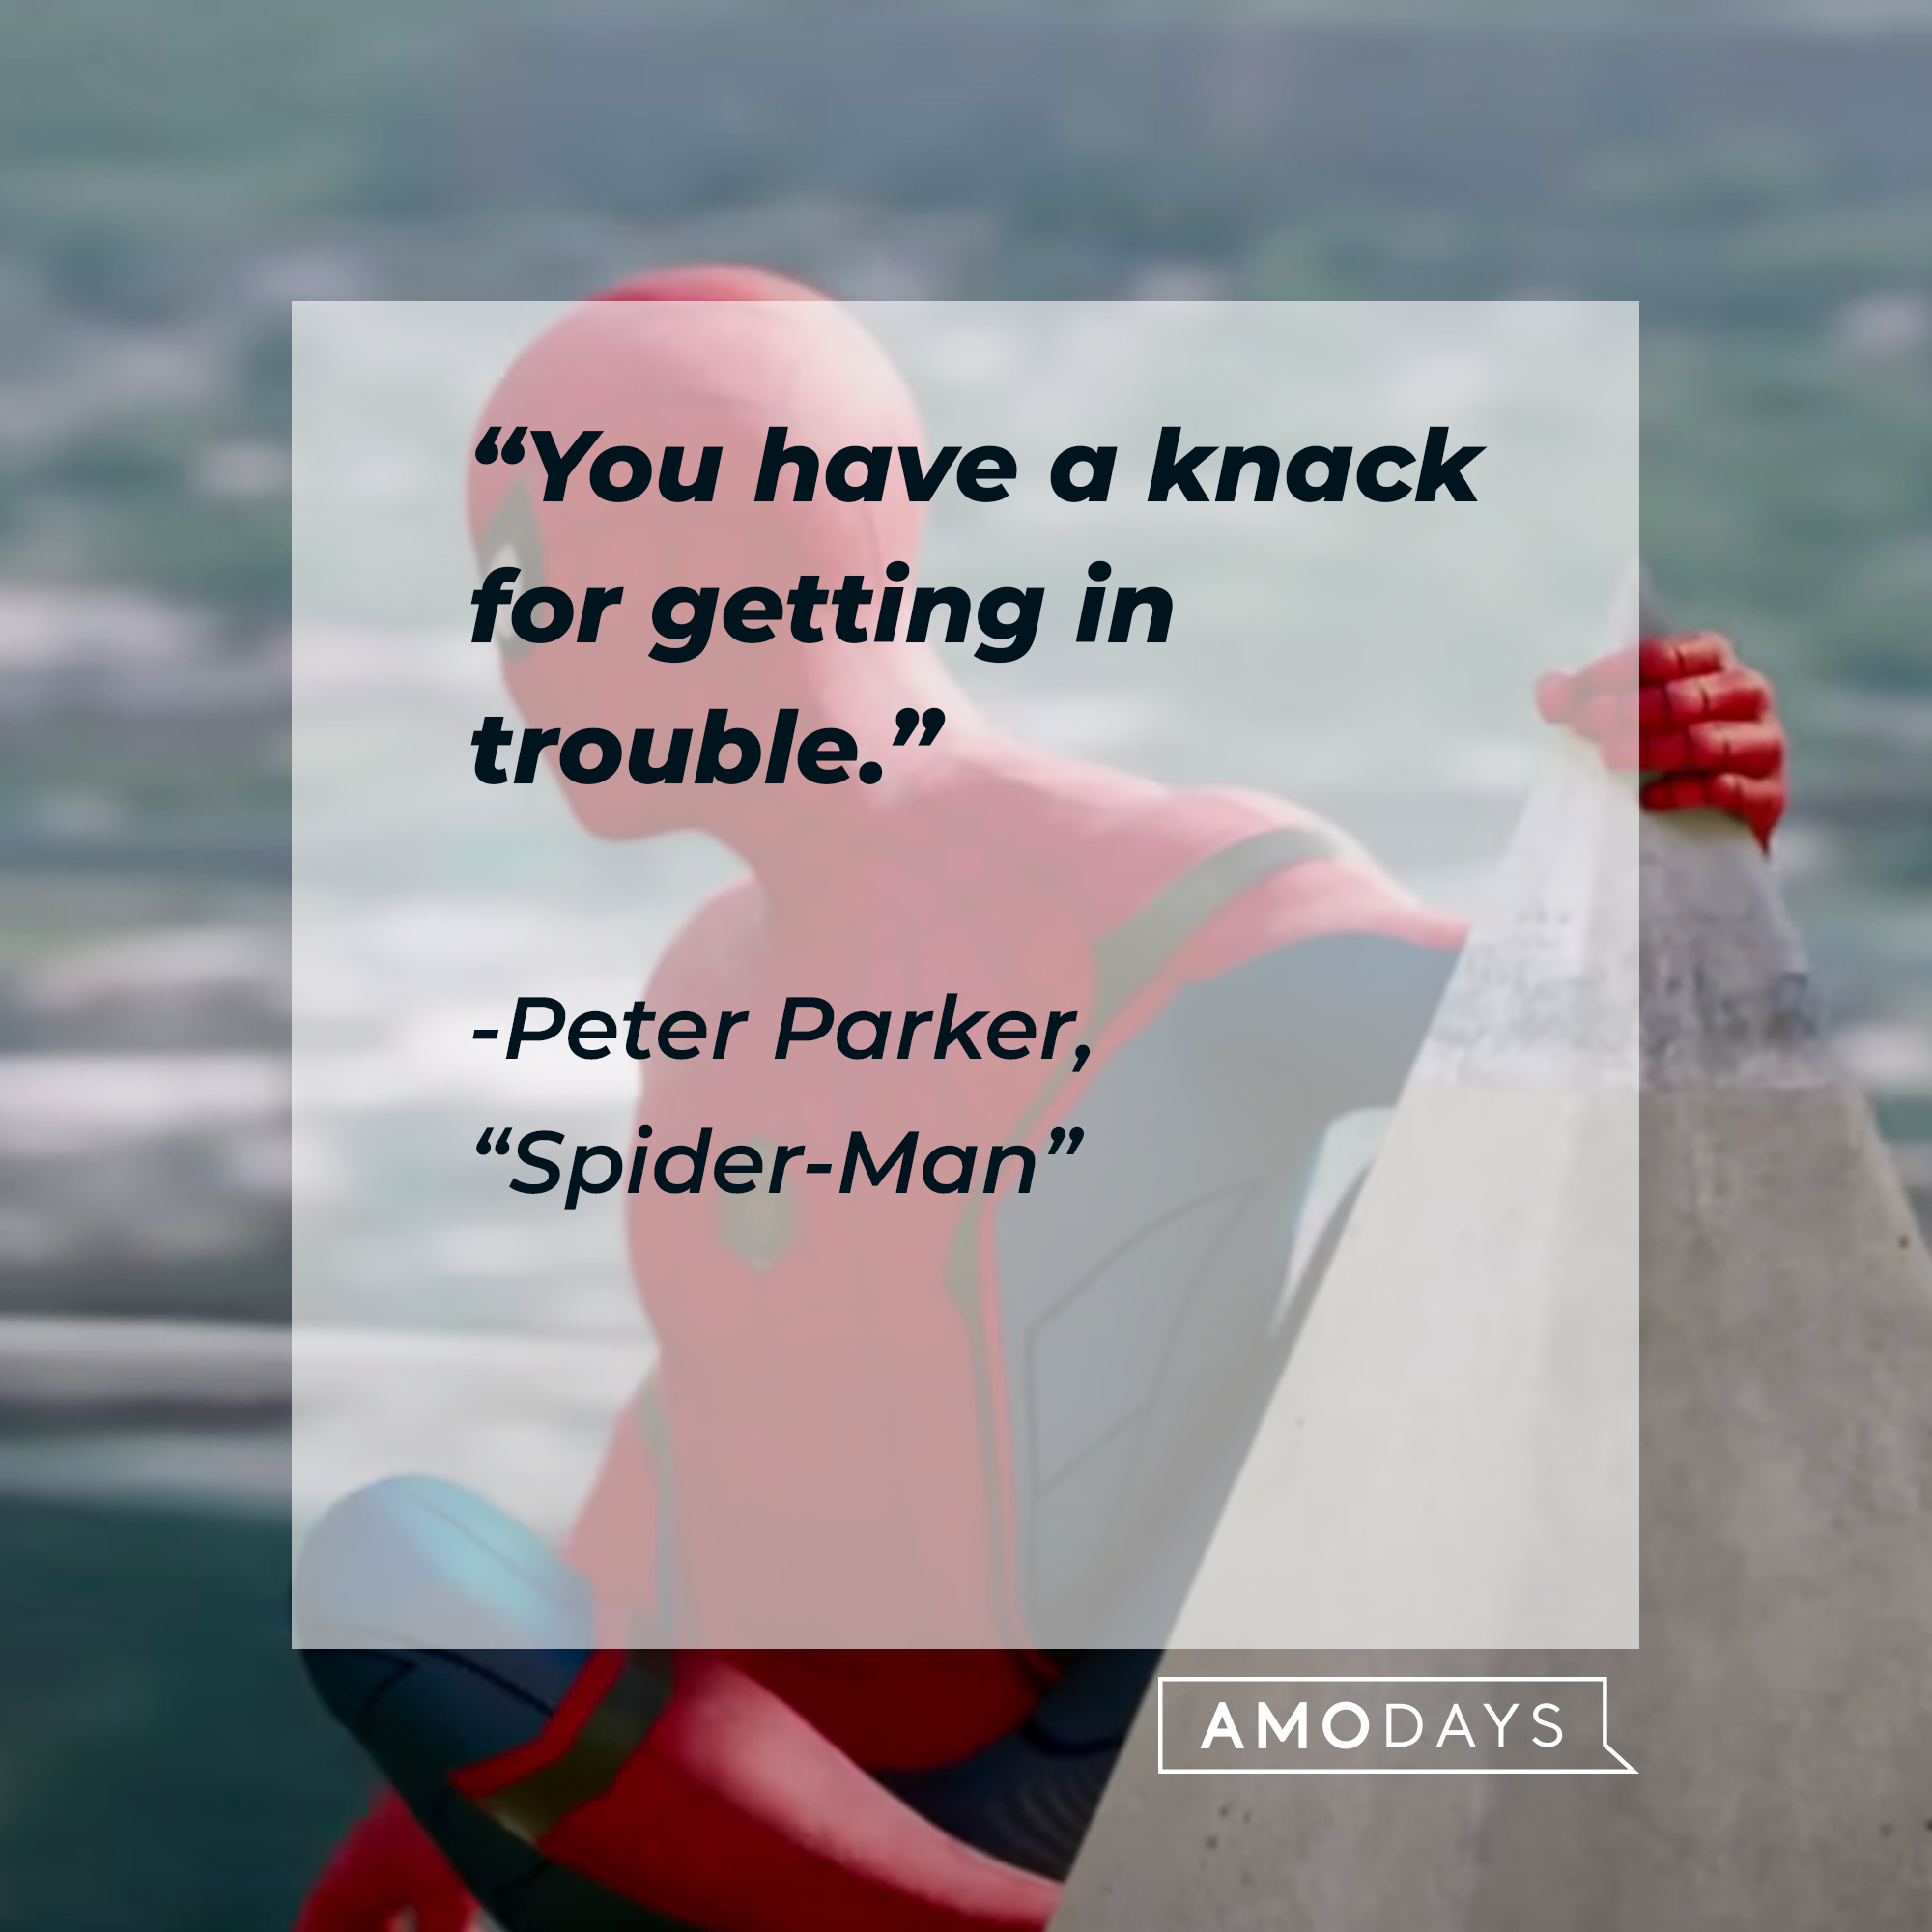 Spider-Man's quote from "Spider-Man:" “You have a knack for getting in trouble.”  | Source: Facebook.com/SpiderManMovie